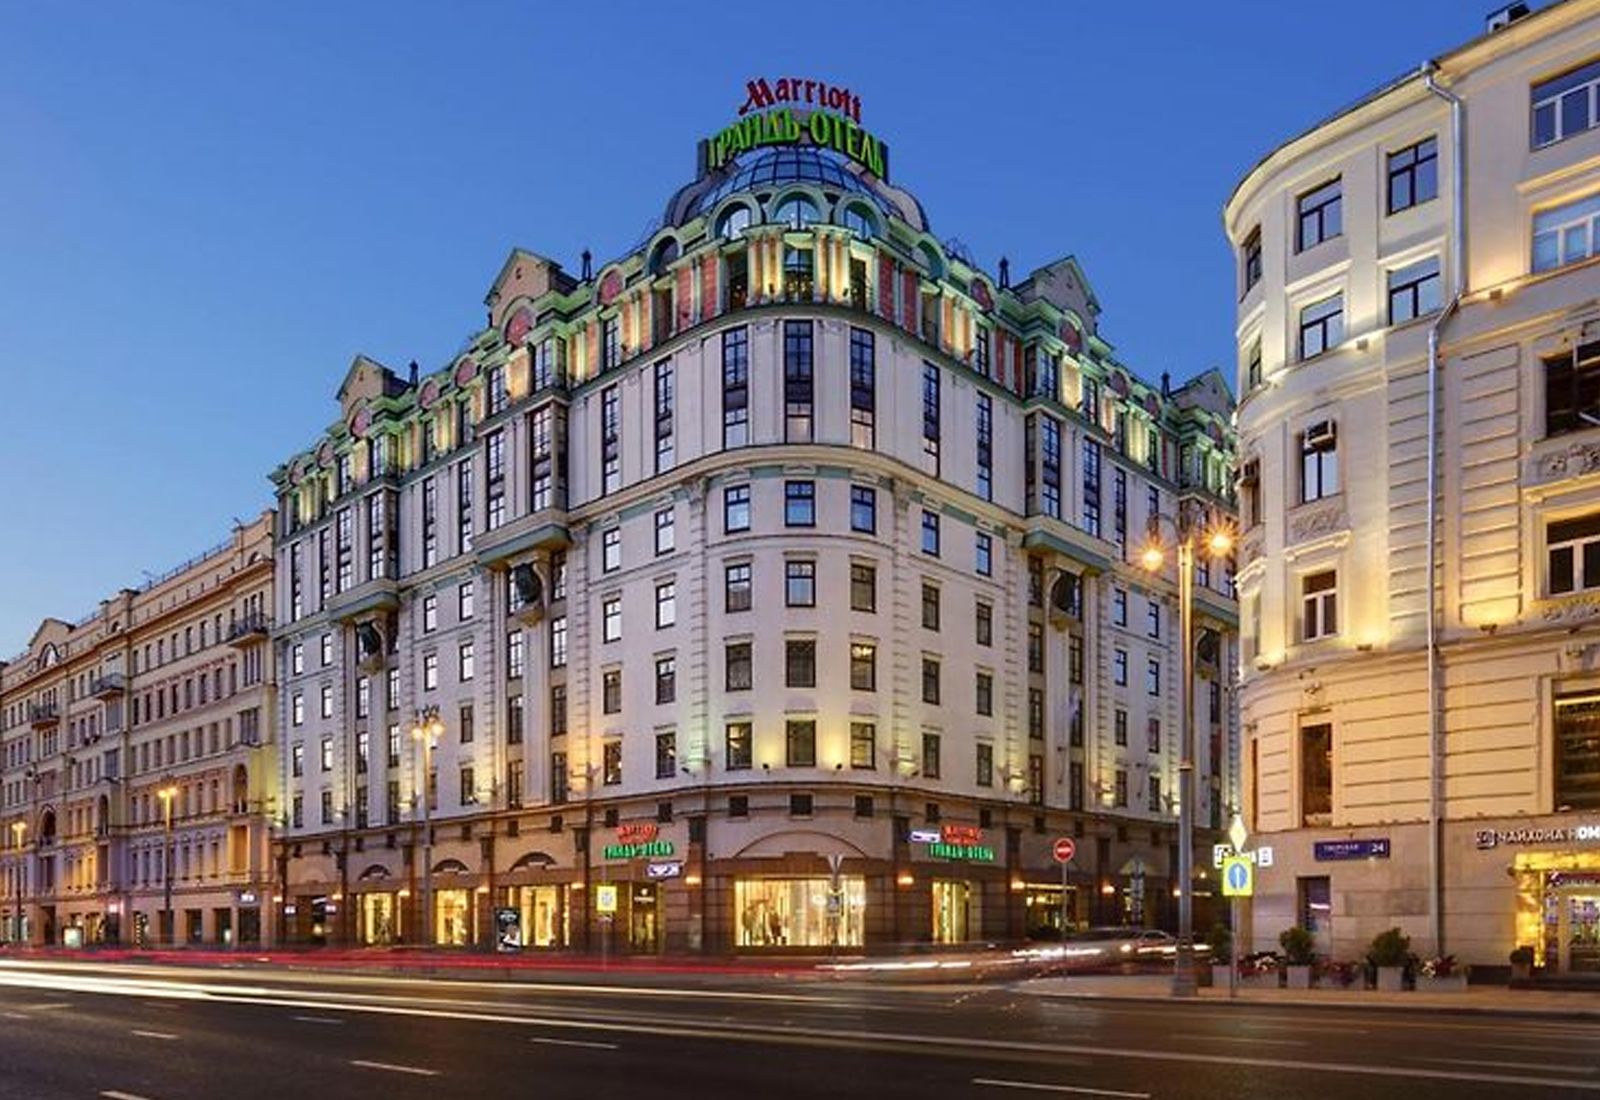 MOSCOW MARRIOTT GRAND HOTEL